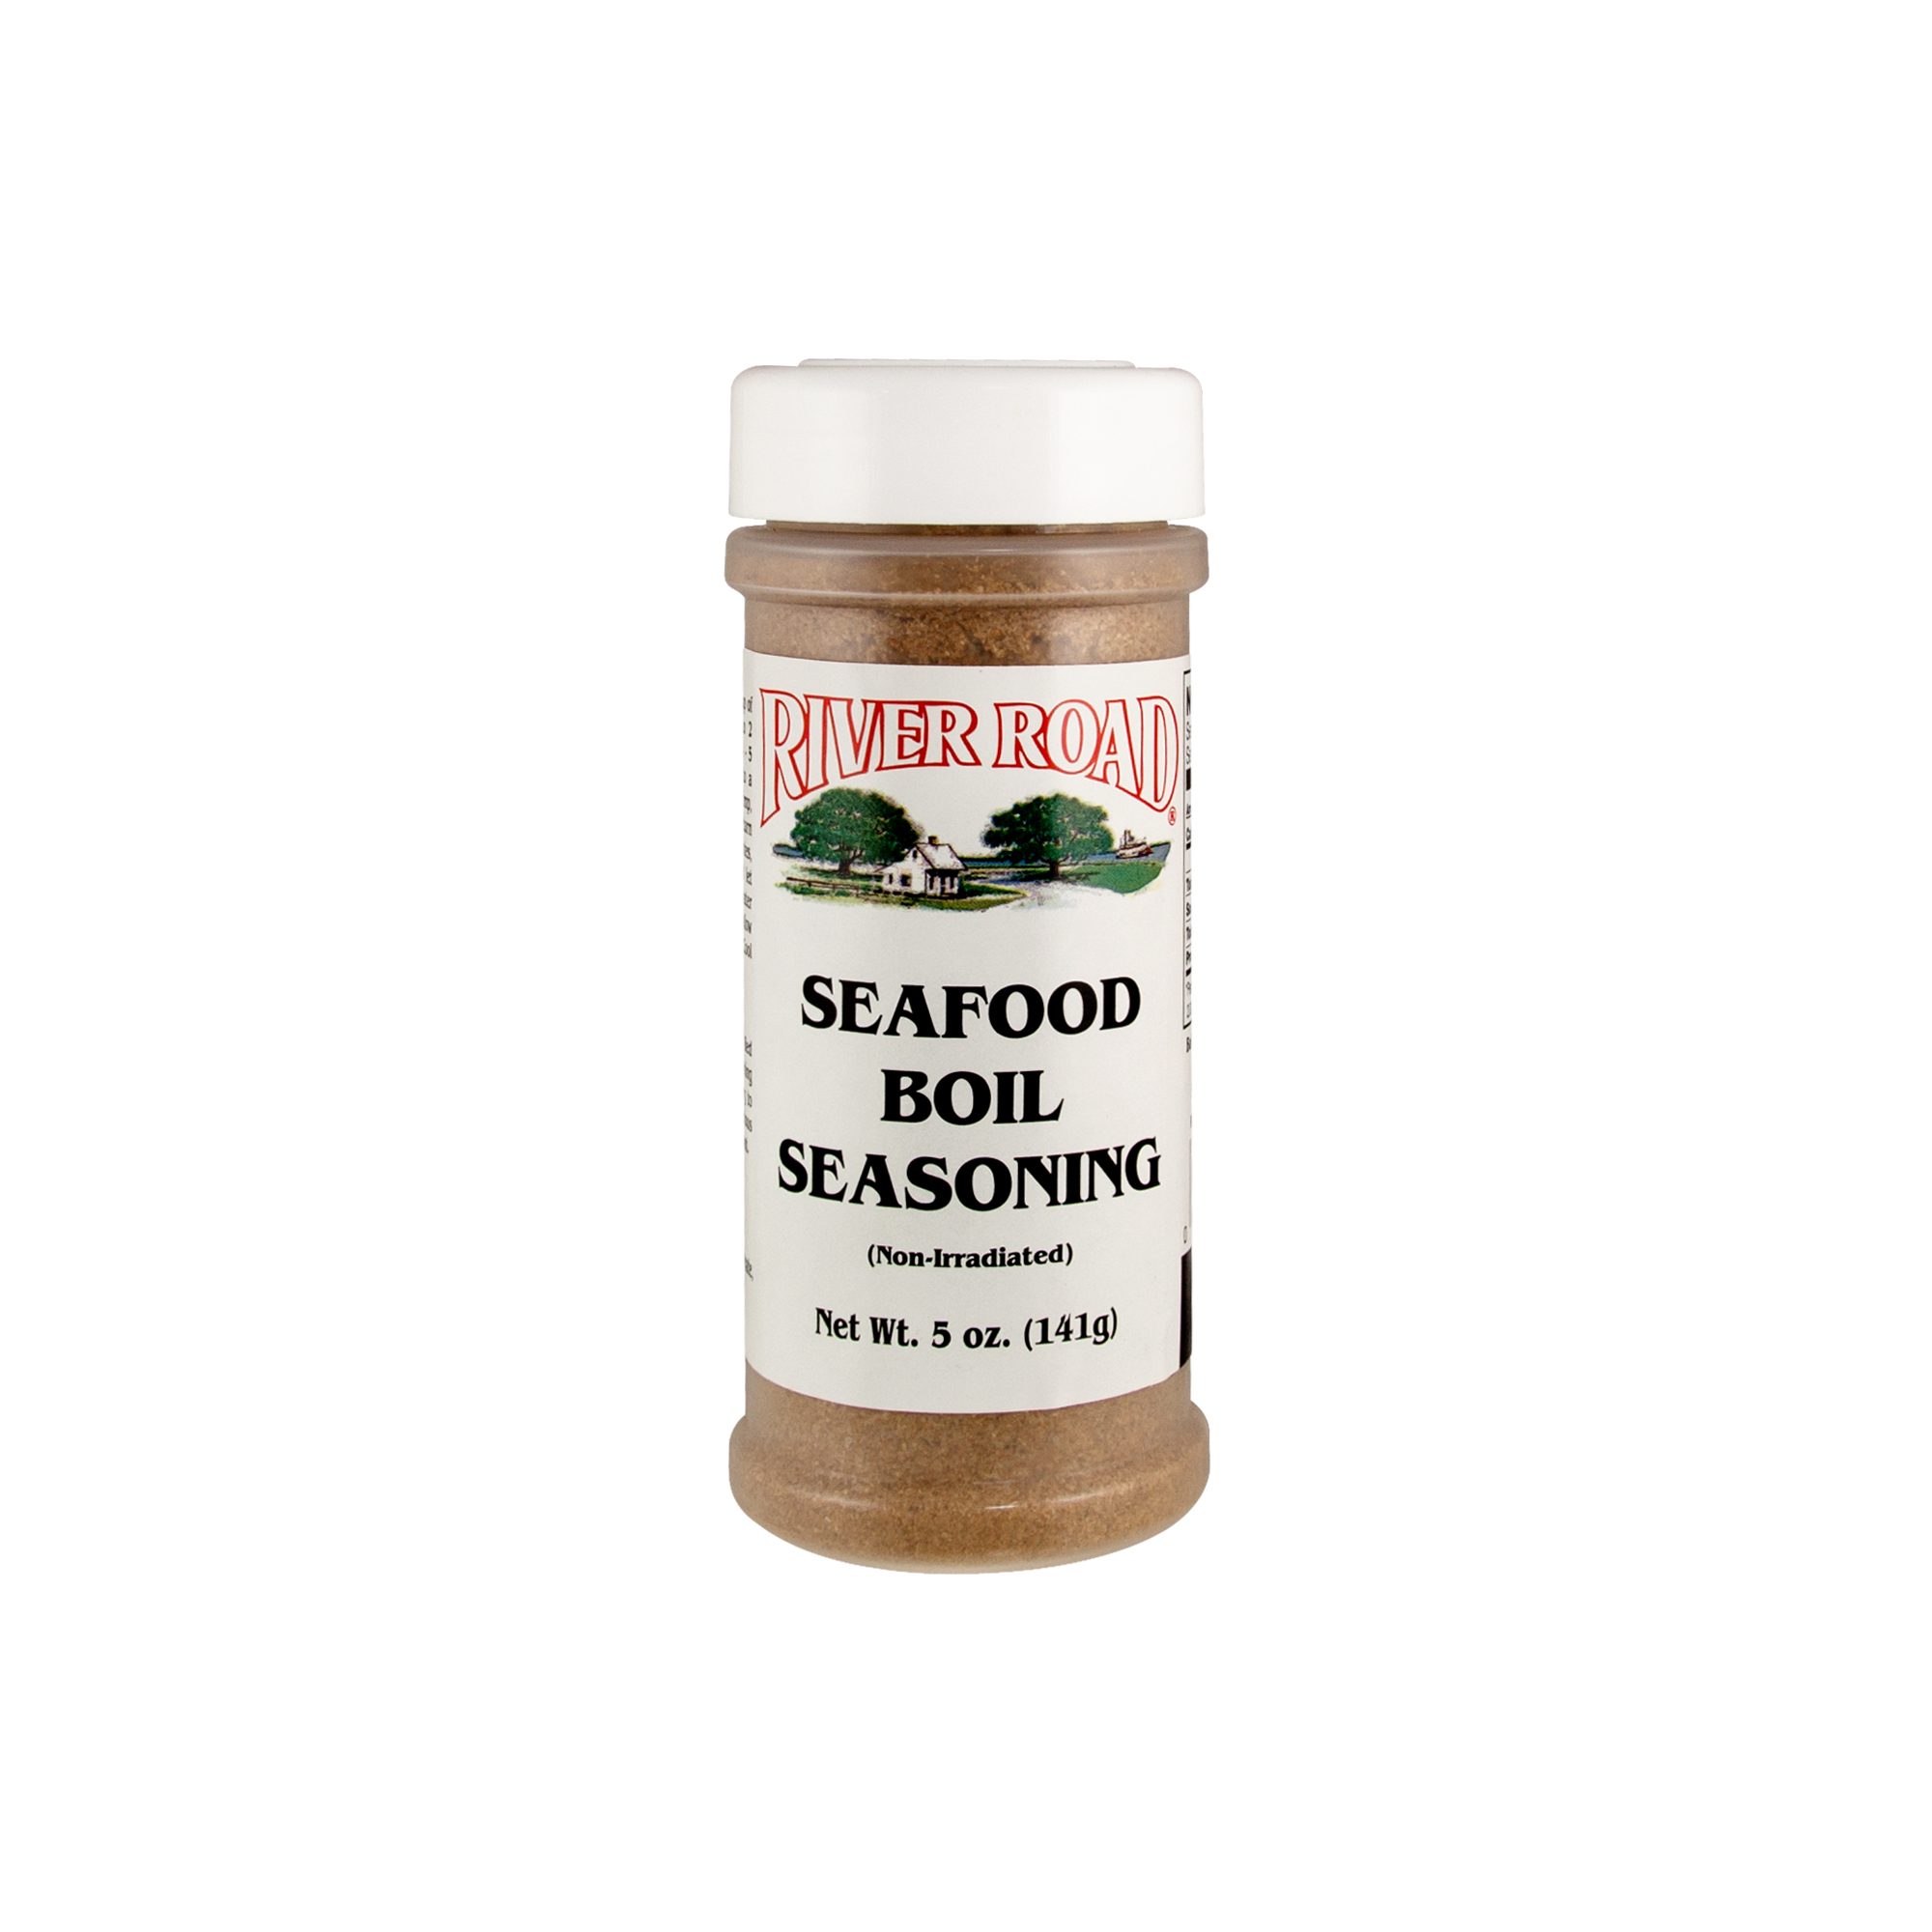 Red Lobster Seafood Seasoning: Calories, Nutrition Analysis & More